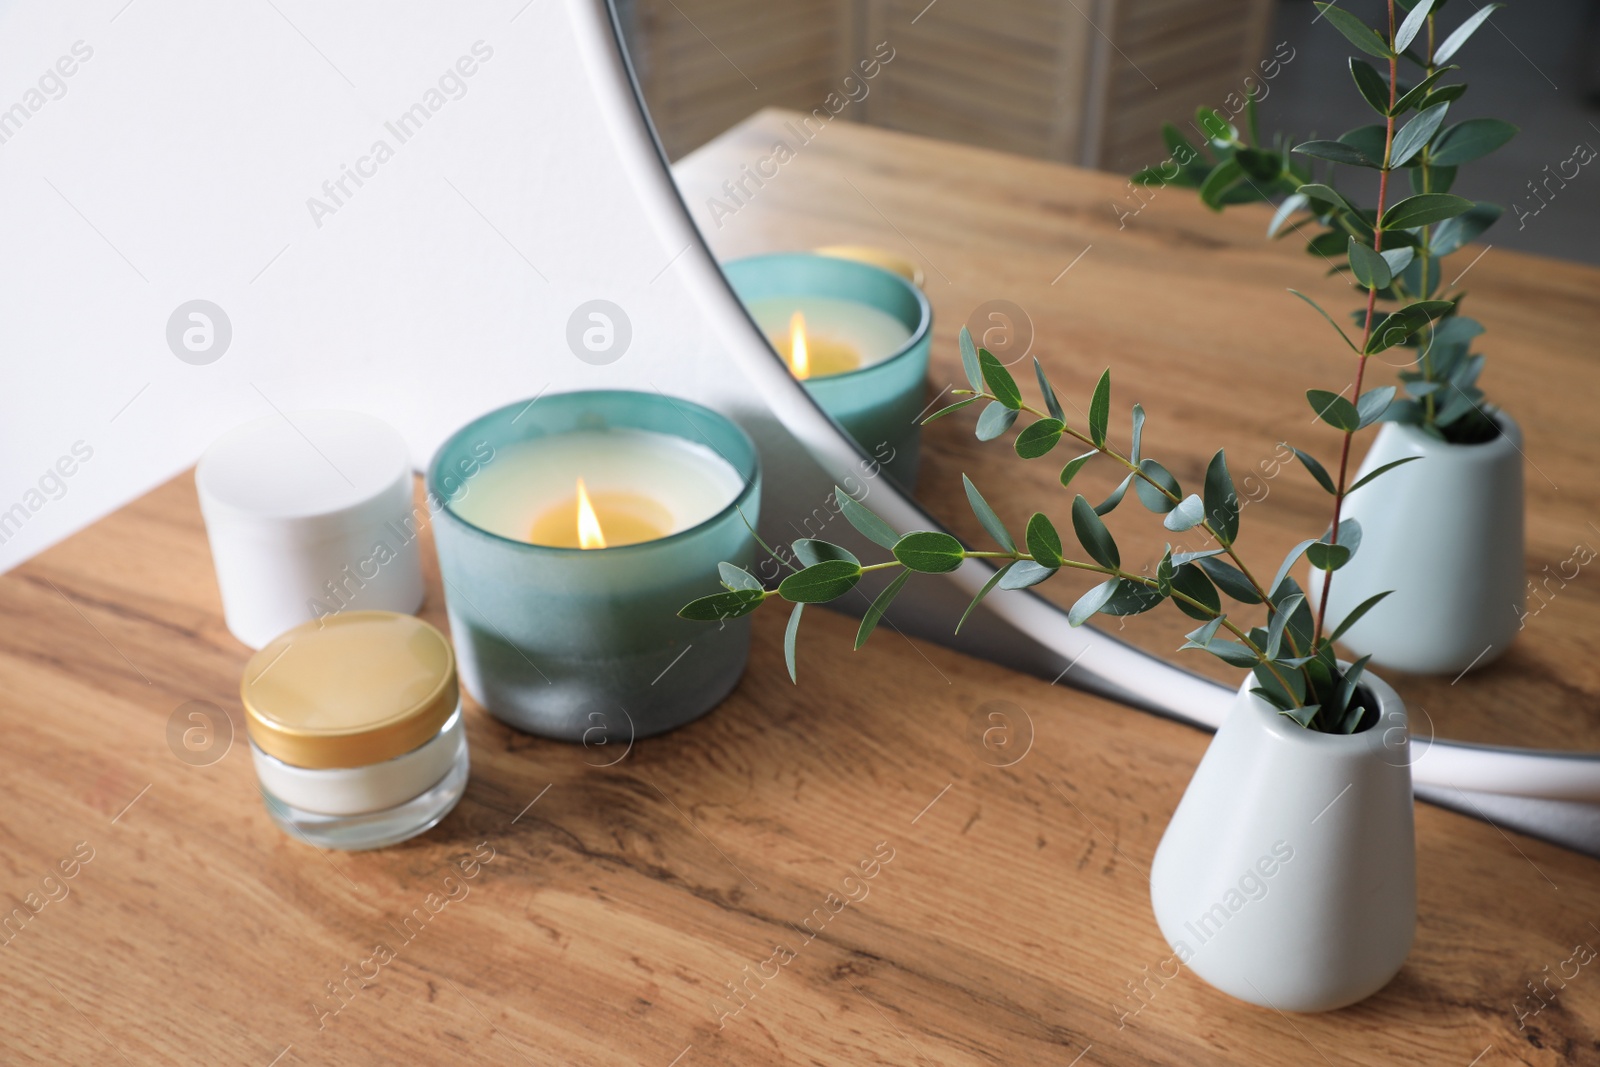 Photo of Burning candle, cosmetic products and vase on wooden dressing table